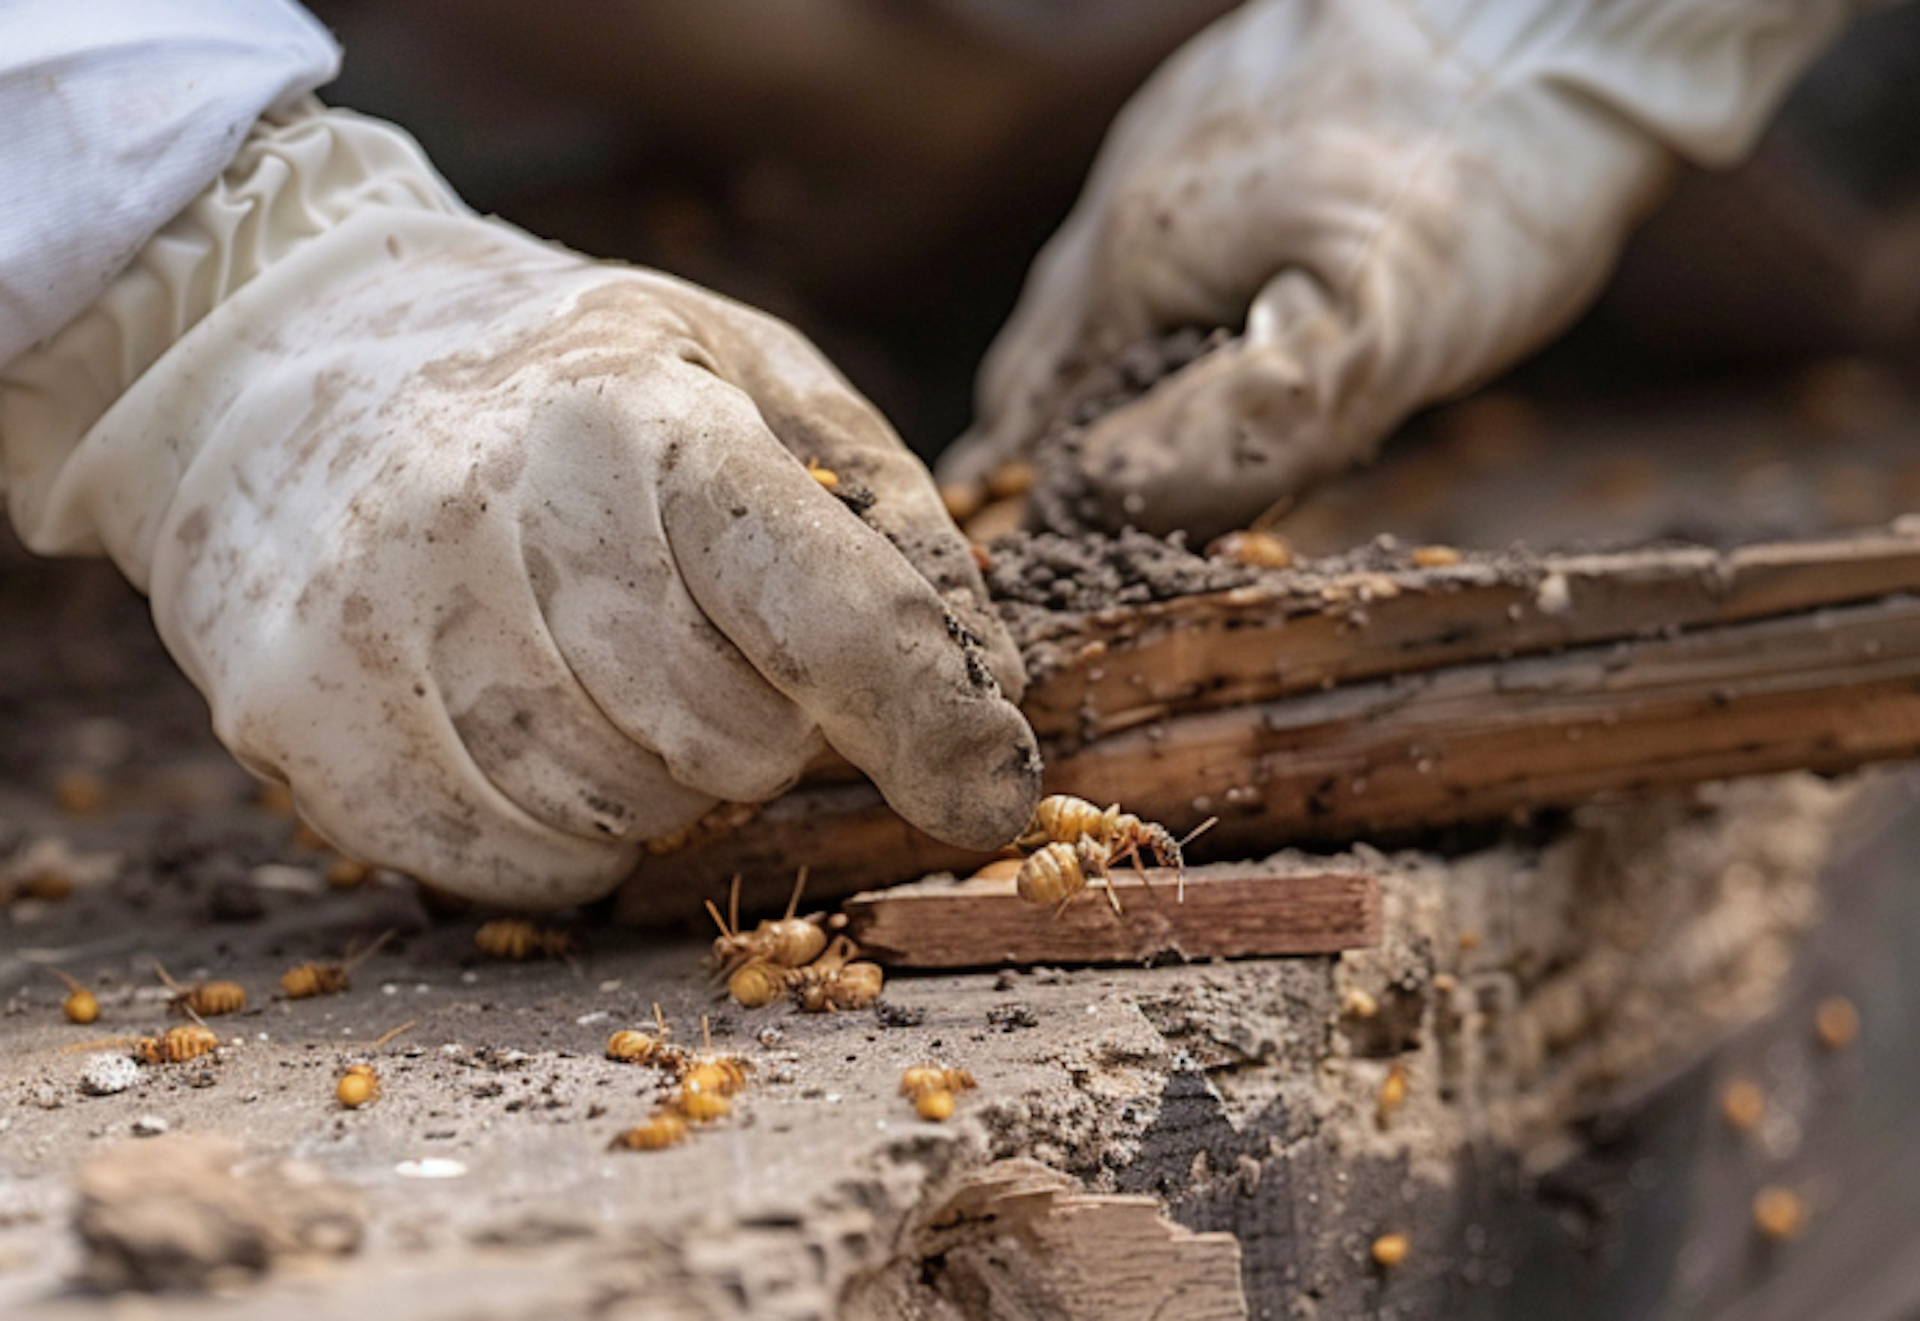 Termite inspections are the first step toward remedying any termite infestation